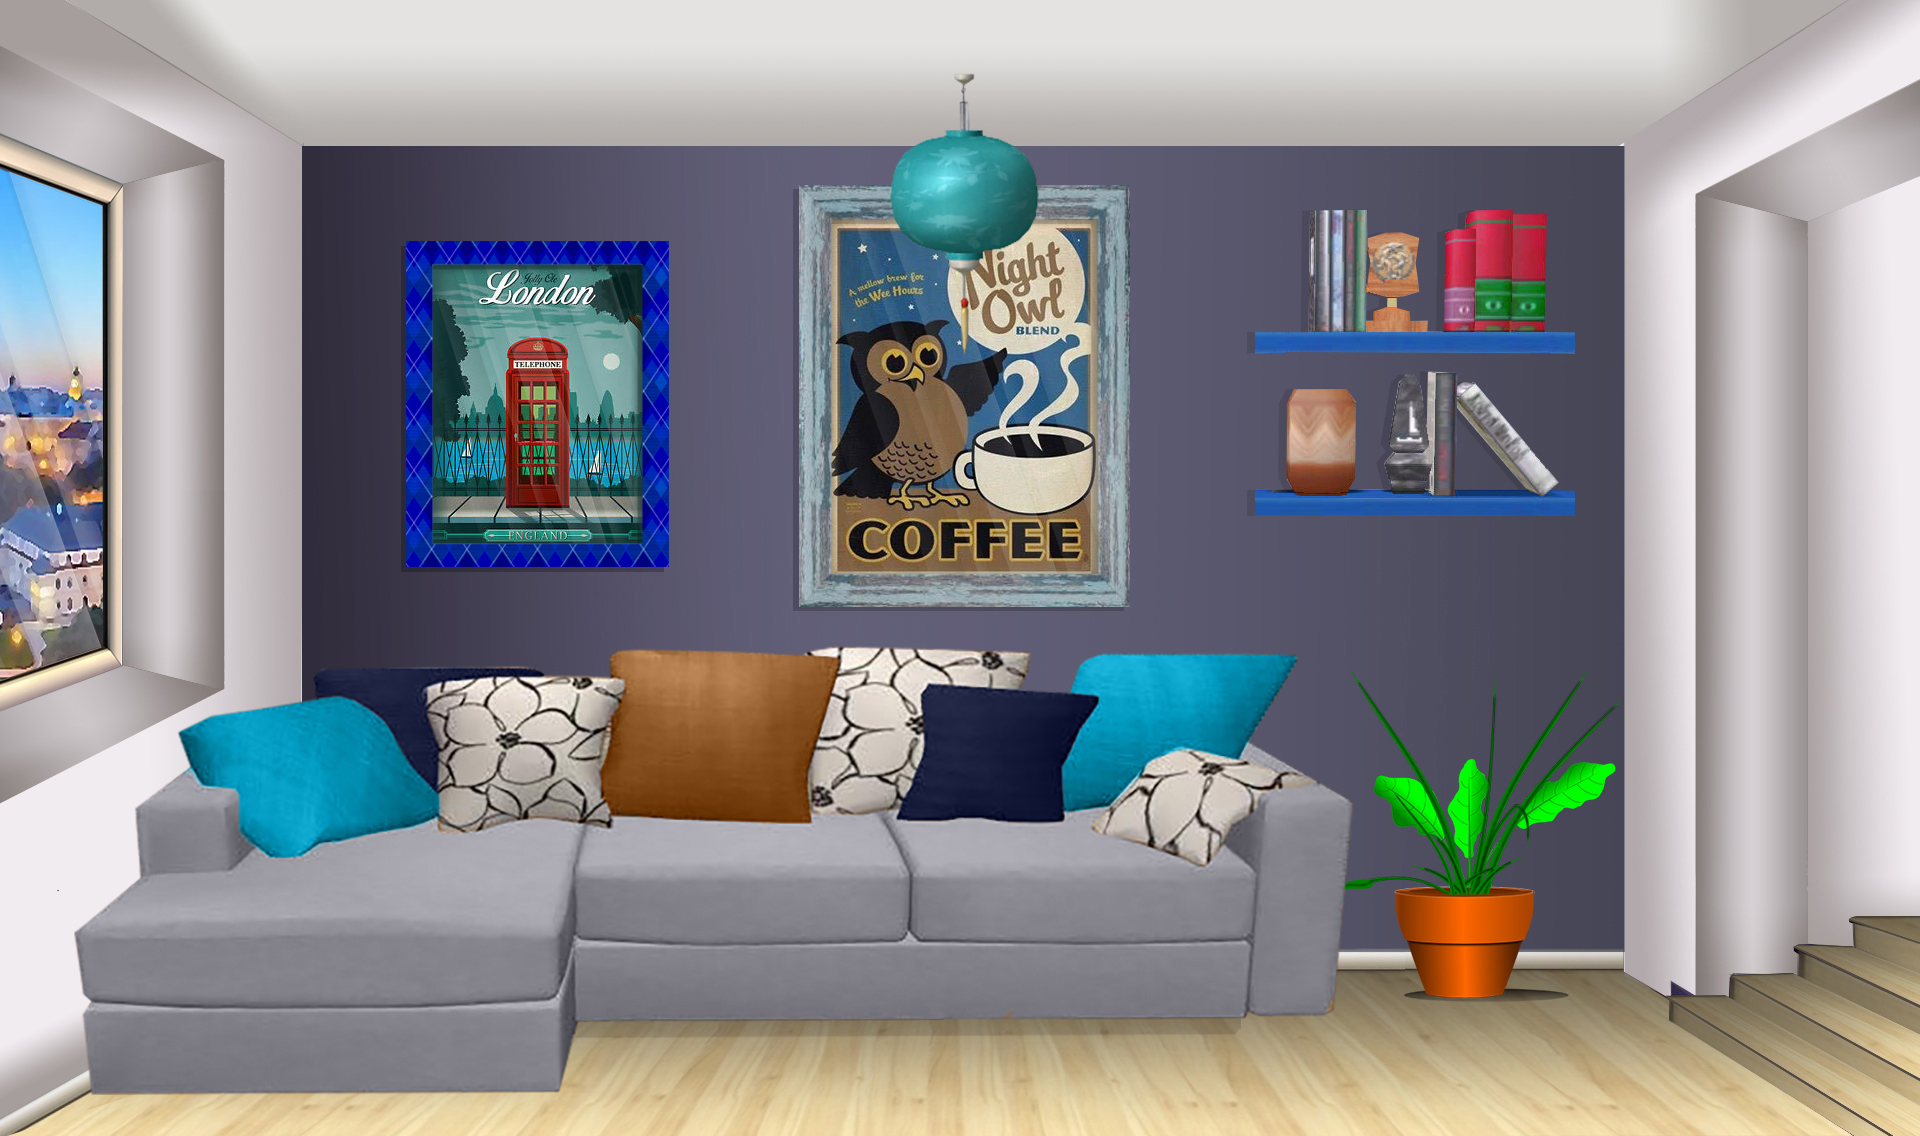 INT. APARTMENT BLUE LIVING ROOM – DAY